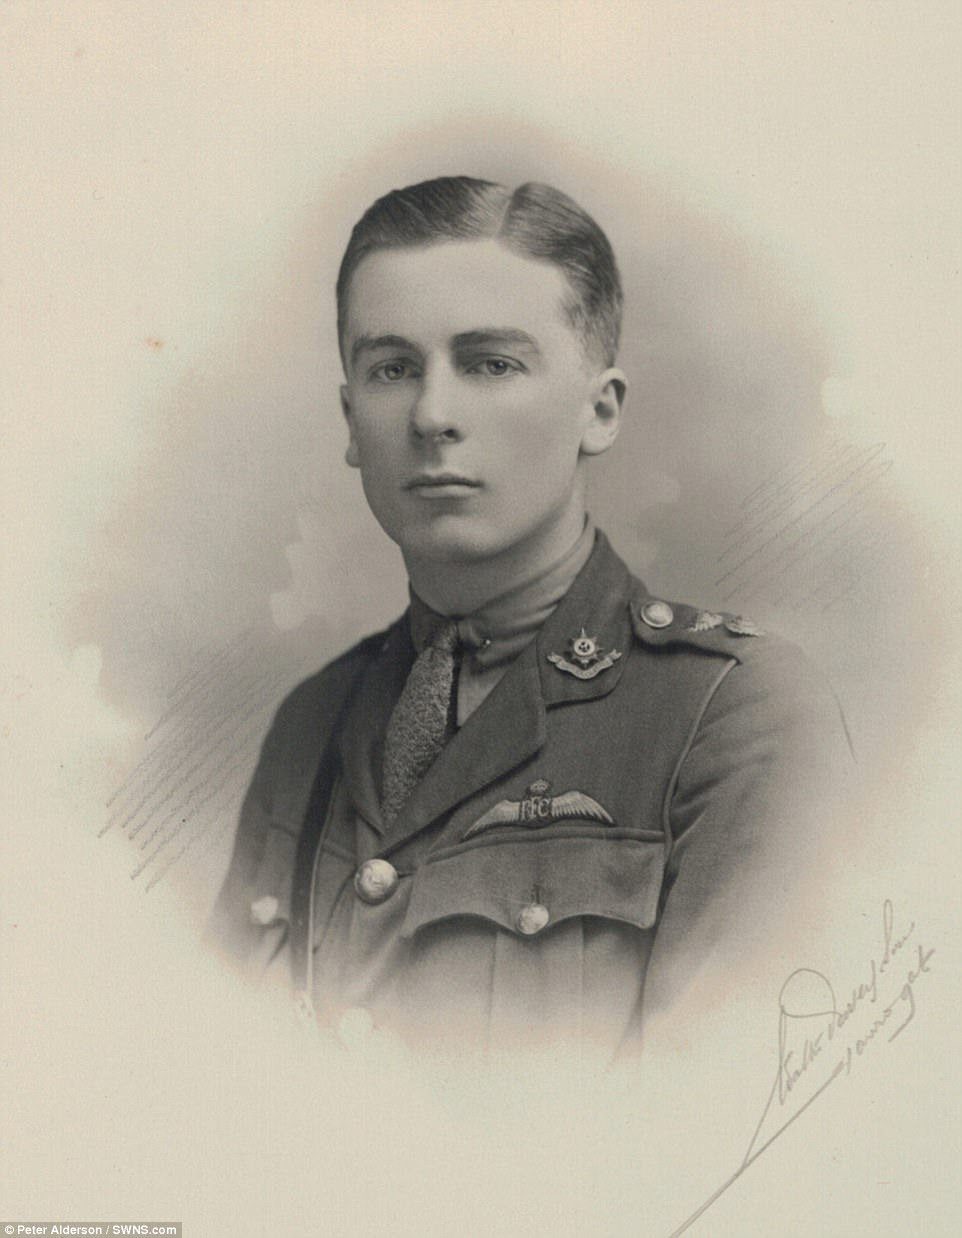 Lieutenant 'Grey' Alderson, one of the pilots involved in the 'fierce aerial combat', later revealed in the Popular Flying magazine in 1932 that they did not have time to get changed out of their slippers before taking to the skies in the 1918 battle. The three war heroes left their base camp in Warloy-Baillon, France, after being given orders to attack enemies during their WWI efforts in 1918